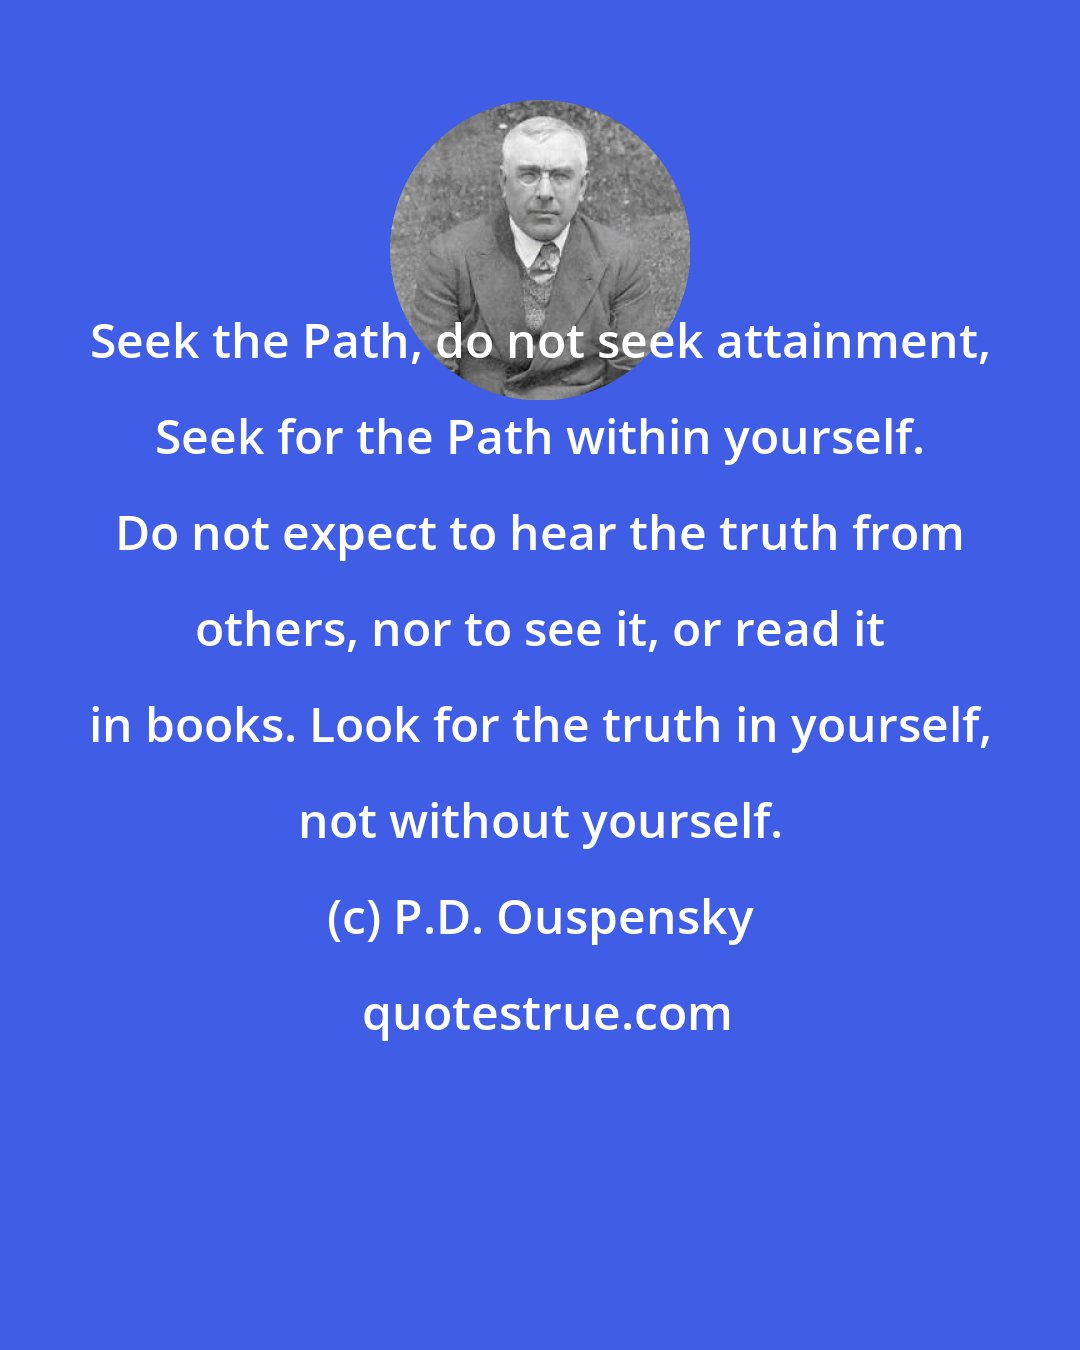 P.D. Ouspensky: Seek the Path, do not seek attainment, Seek for the Path within yourself. Do not expect to hear the truth from others, nor to see it, or read it in books. Look for the truth in yourself, not without yourself.